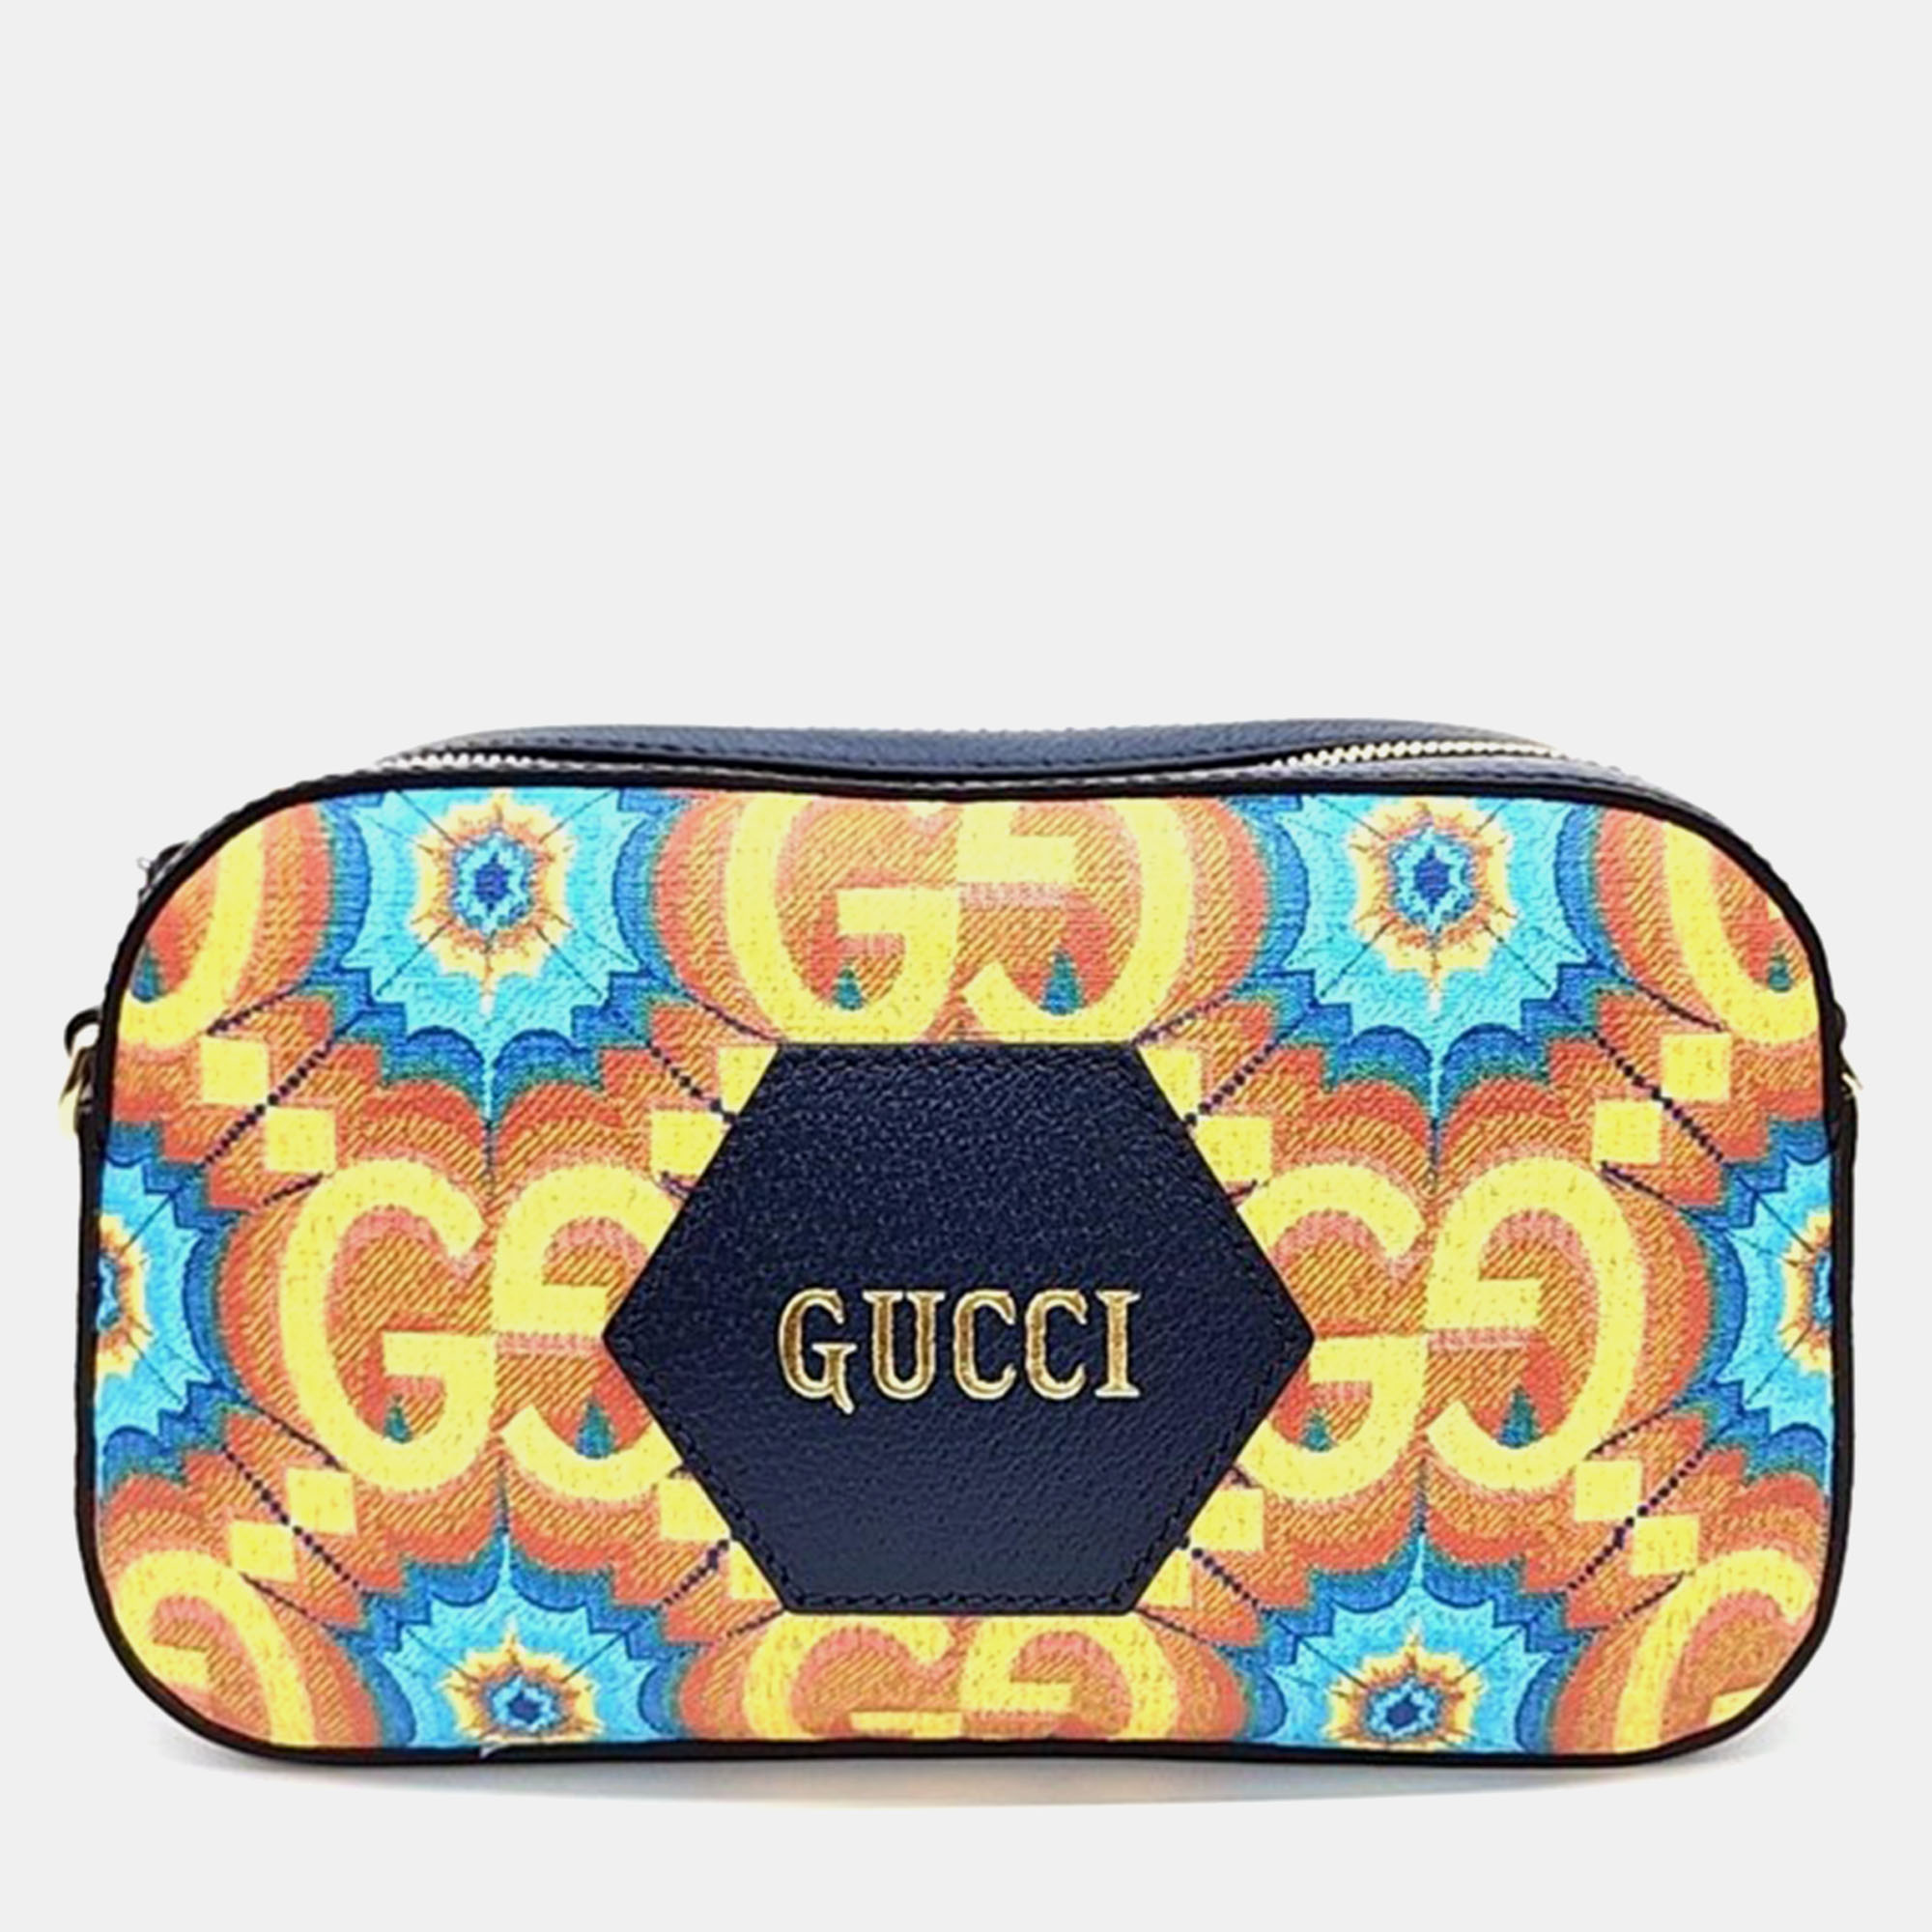 Gucci navy blue pvc and leather gg supreme messenger bag